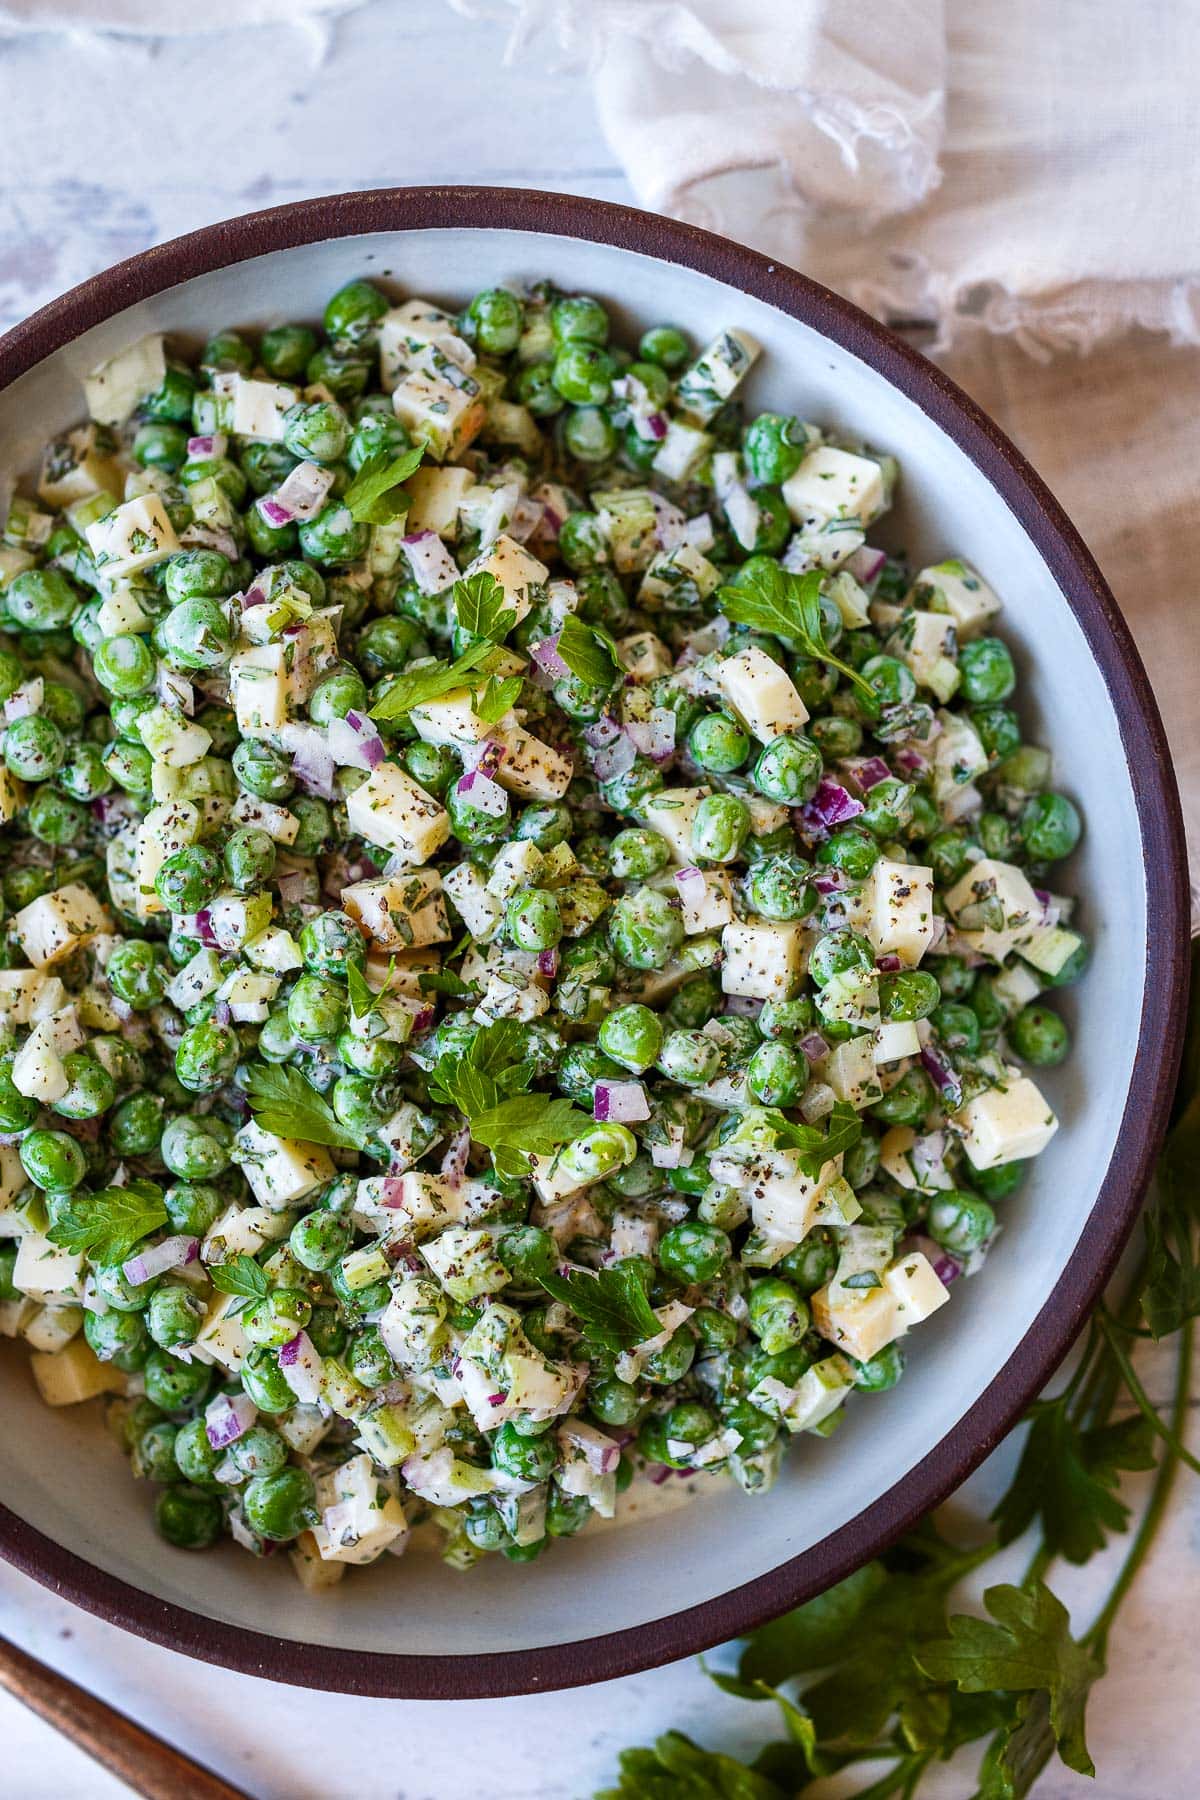 A healthy spruced-up version of classic Pea Salad tossed in a creamy Greek yogurt dressing with lots of fresh herbs and smoked cheese. Tangy, delicious, and made in one bowl in about 20 minutes! Vegetarian, GF, Vegan-adaptable! 